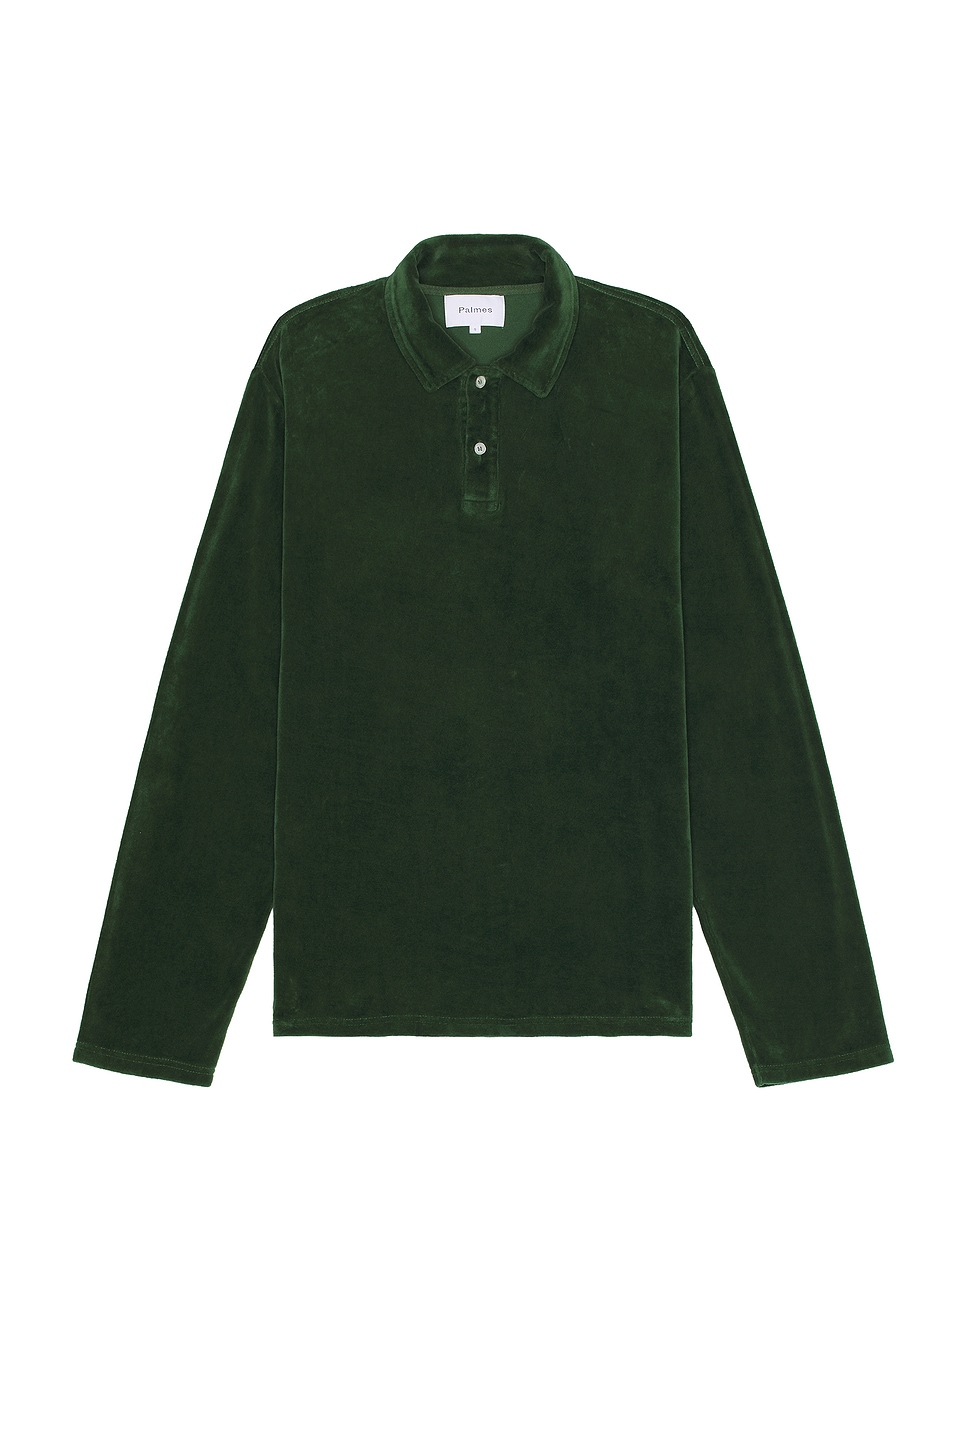 Image 1 of Palmes Towel Long Sleeve Polo in Green